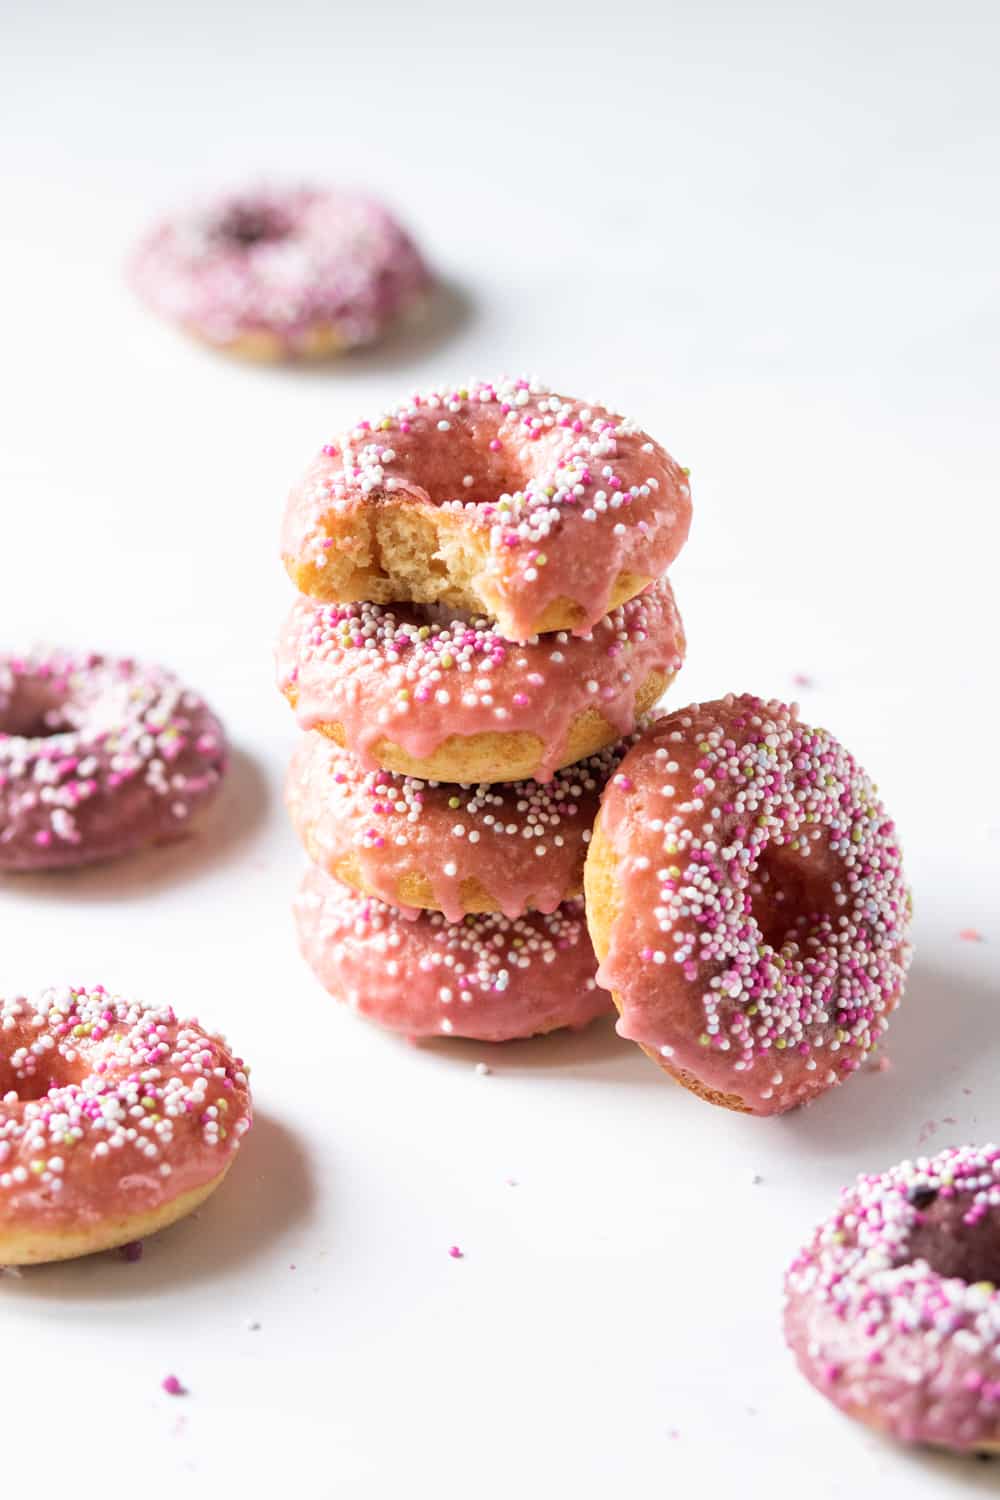 A stack of four vegan donuts with pink glaze and white, pink, and yellow ball sprinkles on top. The donut of top of the stack has a bite taken out of it. There is a whole donut on its side leaning agains the stack. One donut is laying flat in front of it, another donut is in front of the stack, another to the left of it, and one behind it. All the donuts are on a white counter.